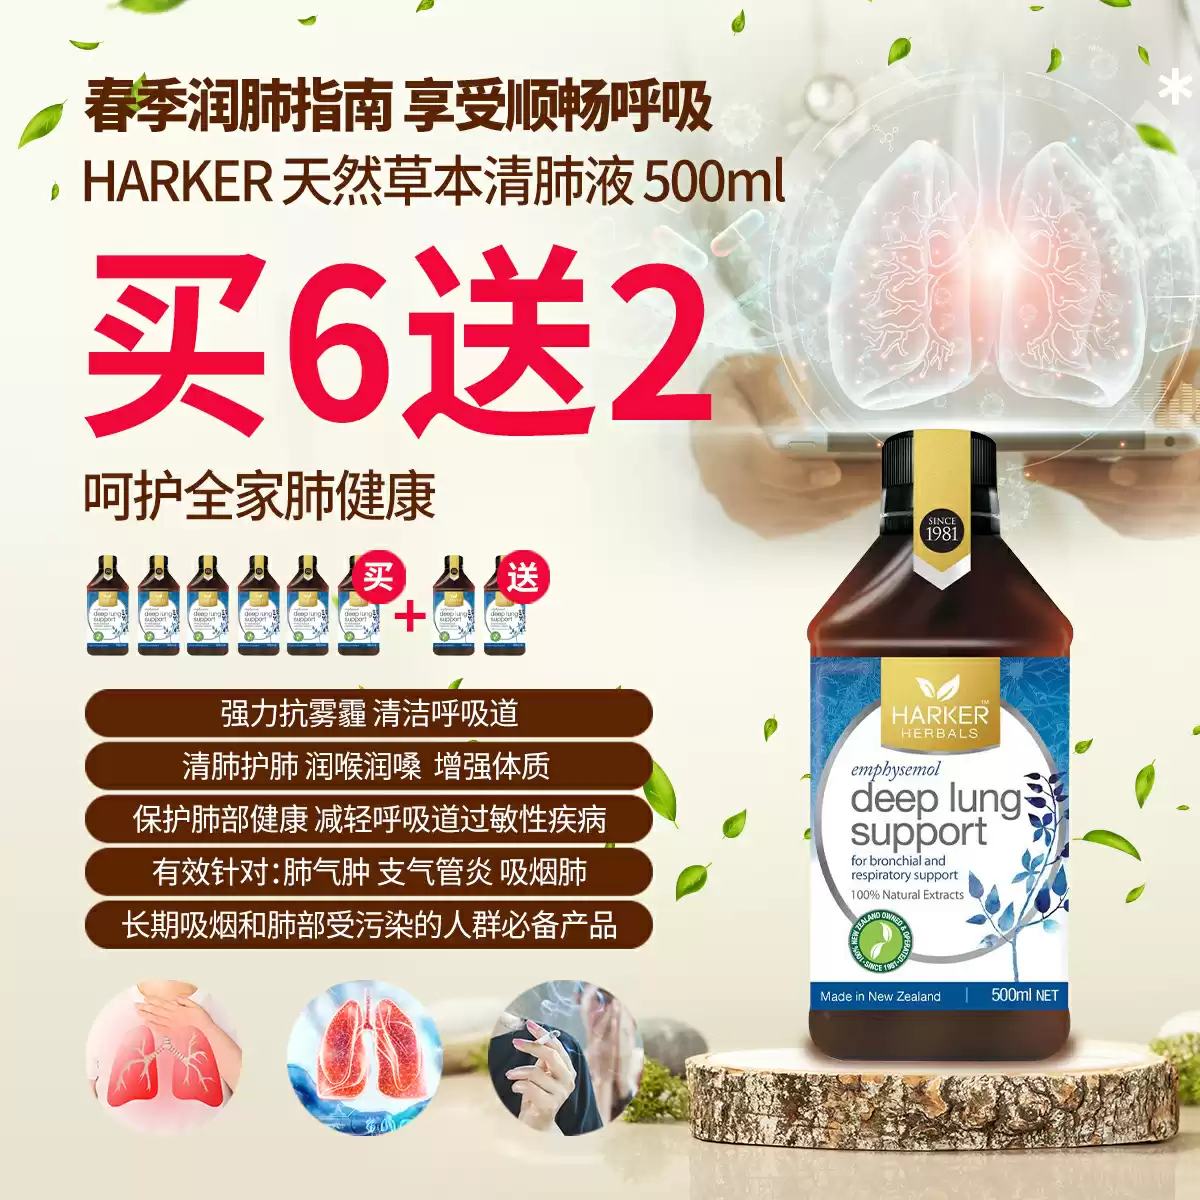 Harker Herbals Deep Lung Support 500ml buy 6 get 2 for free